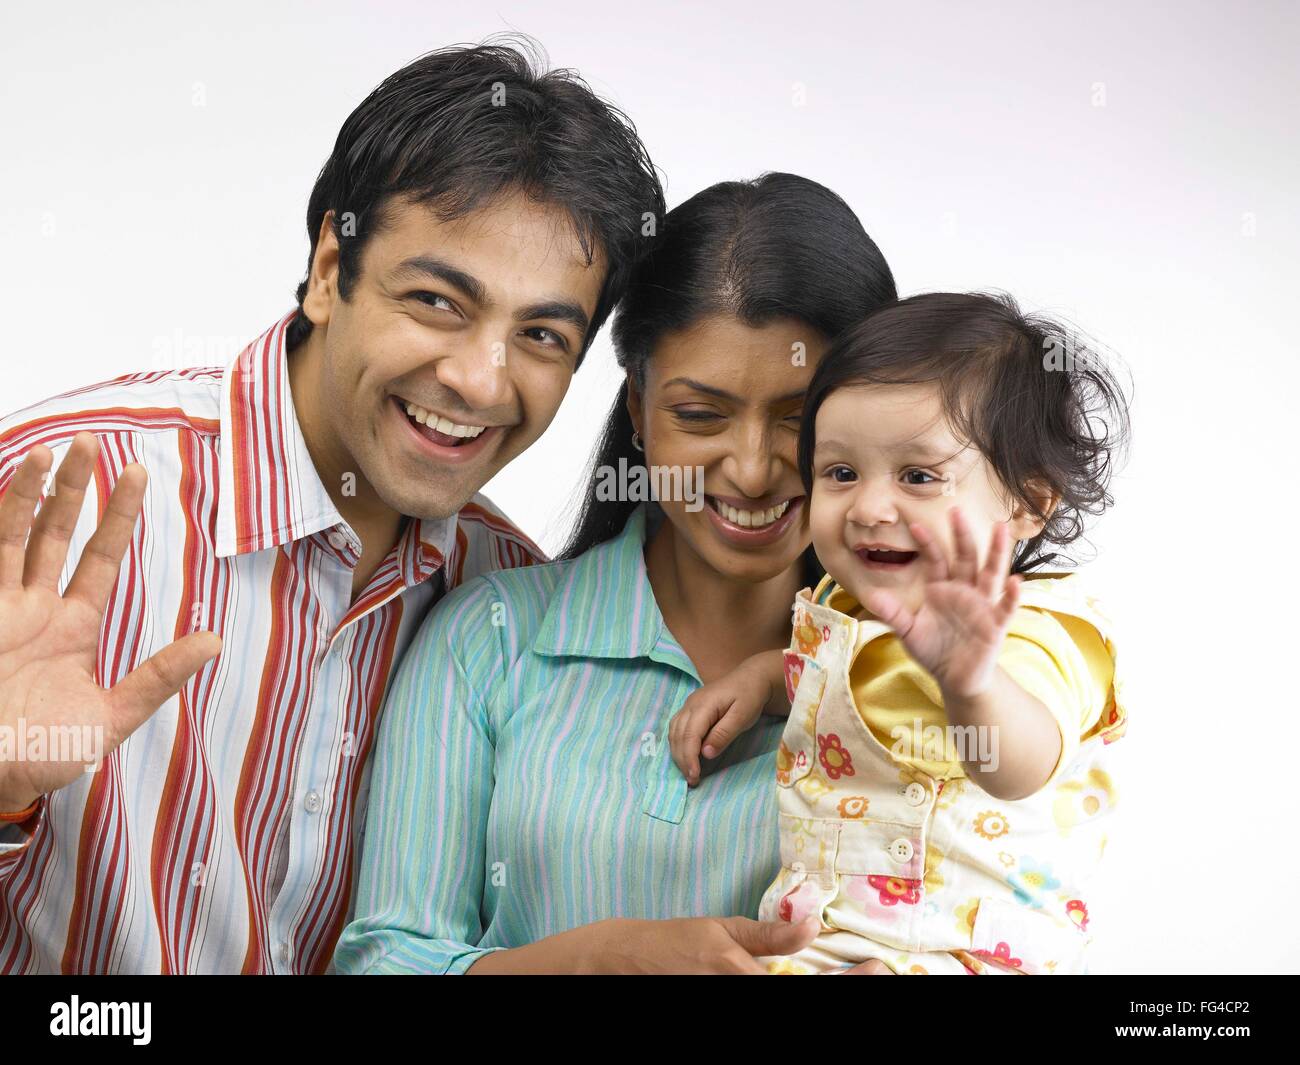 Indian parent with baby girl doing tata MR#702O,702A,702L Stock Photo